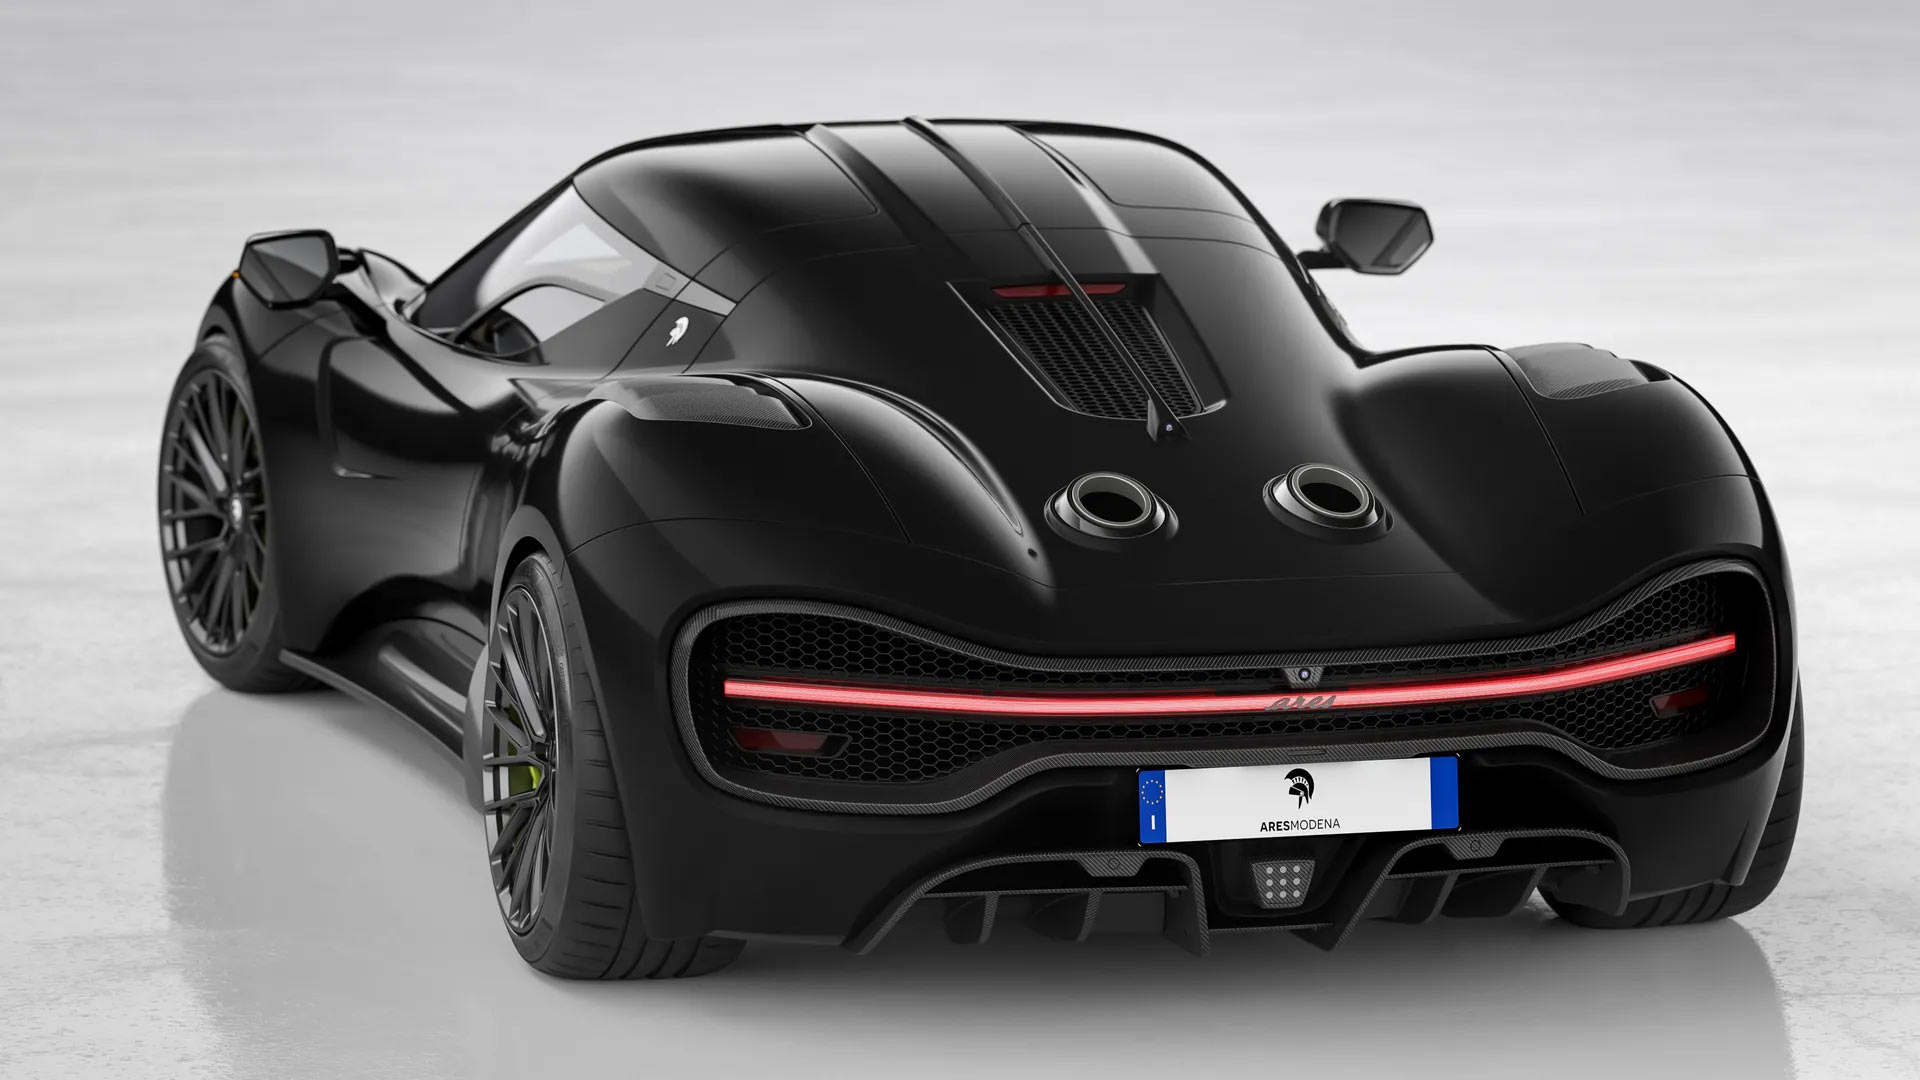 ares modena S1 hypercar concept shown from rear